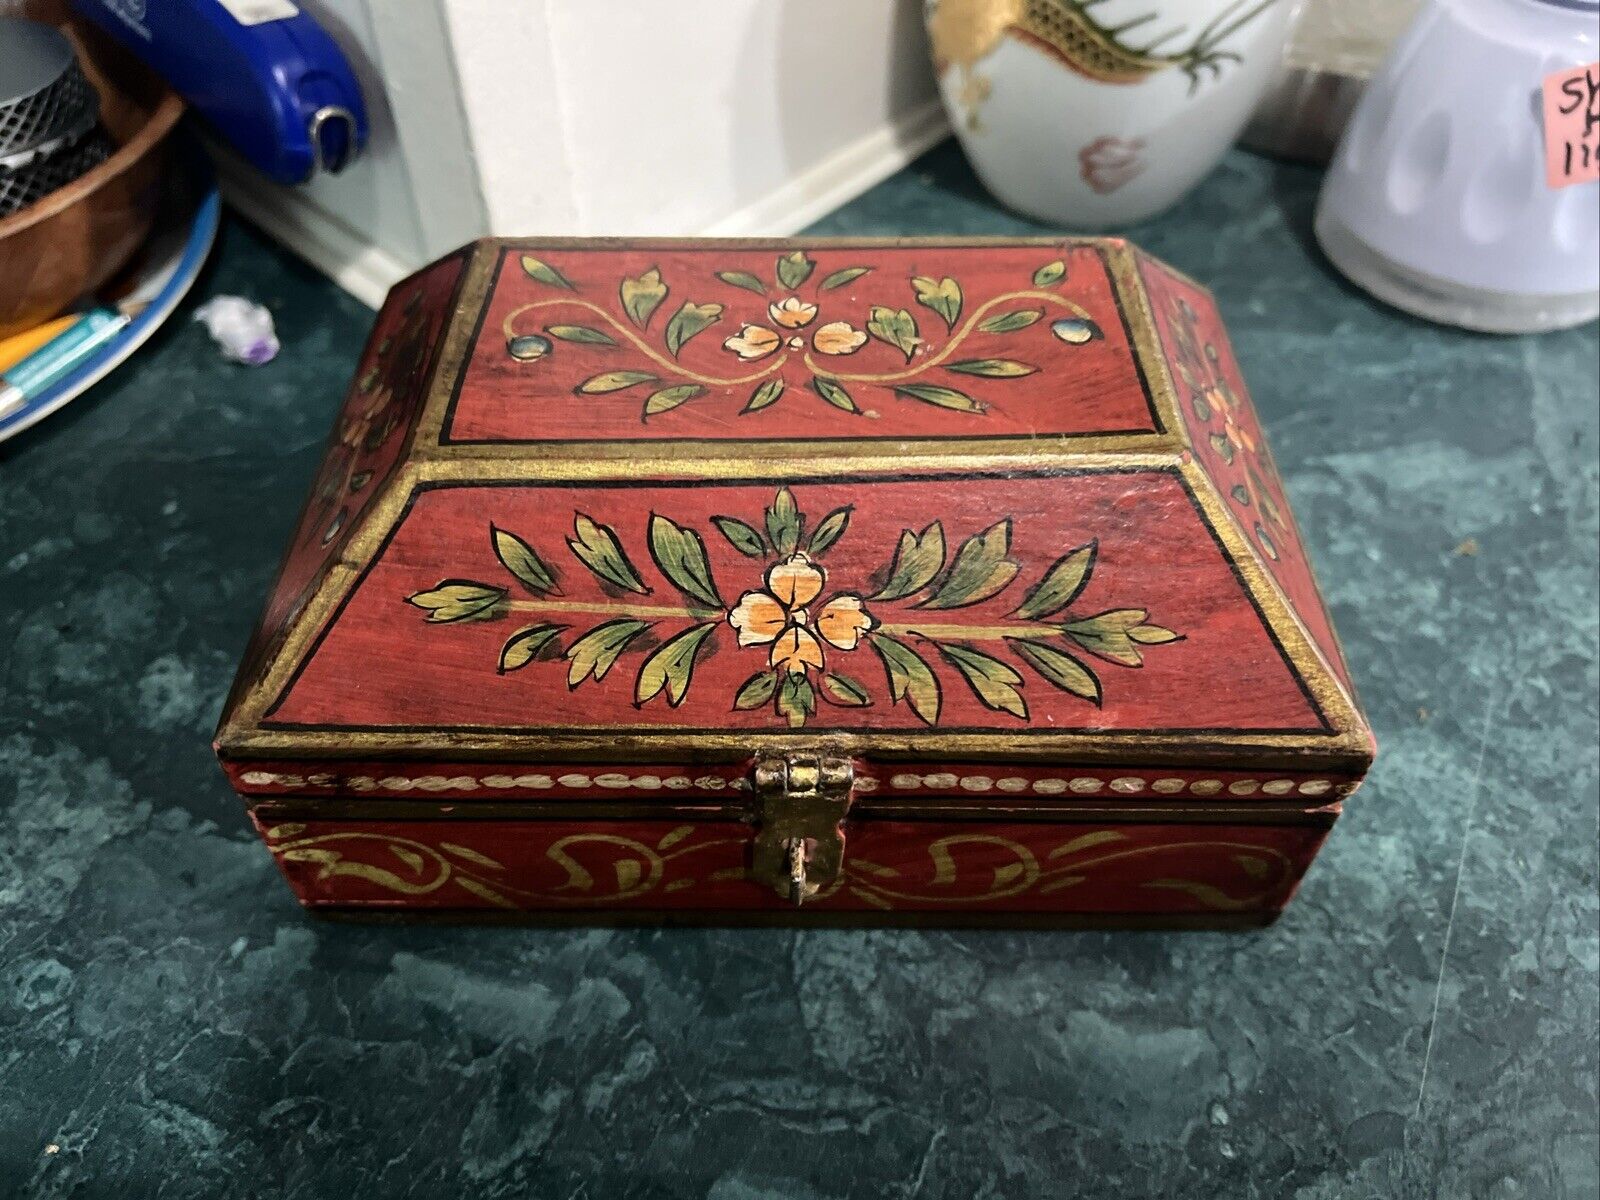 Vinage Wooden Dome Shaped Storage Box Original Old Hand Crafted Floral Painted